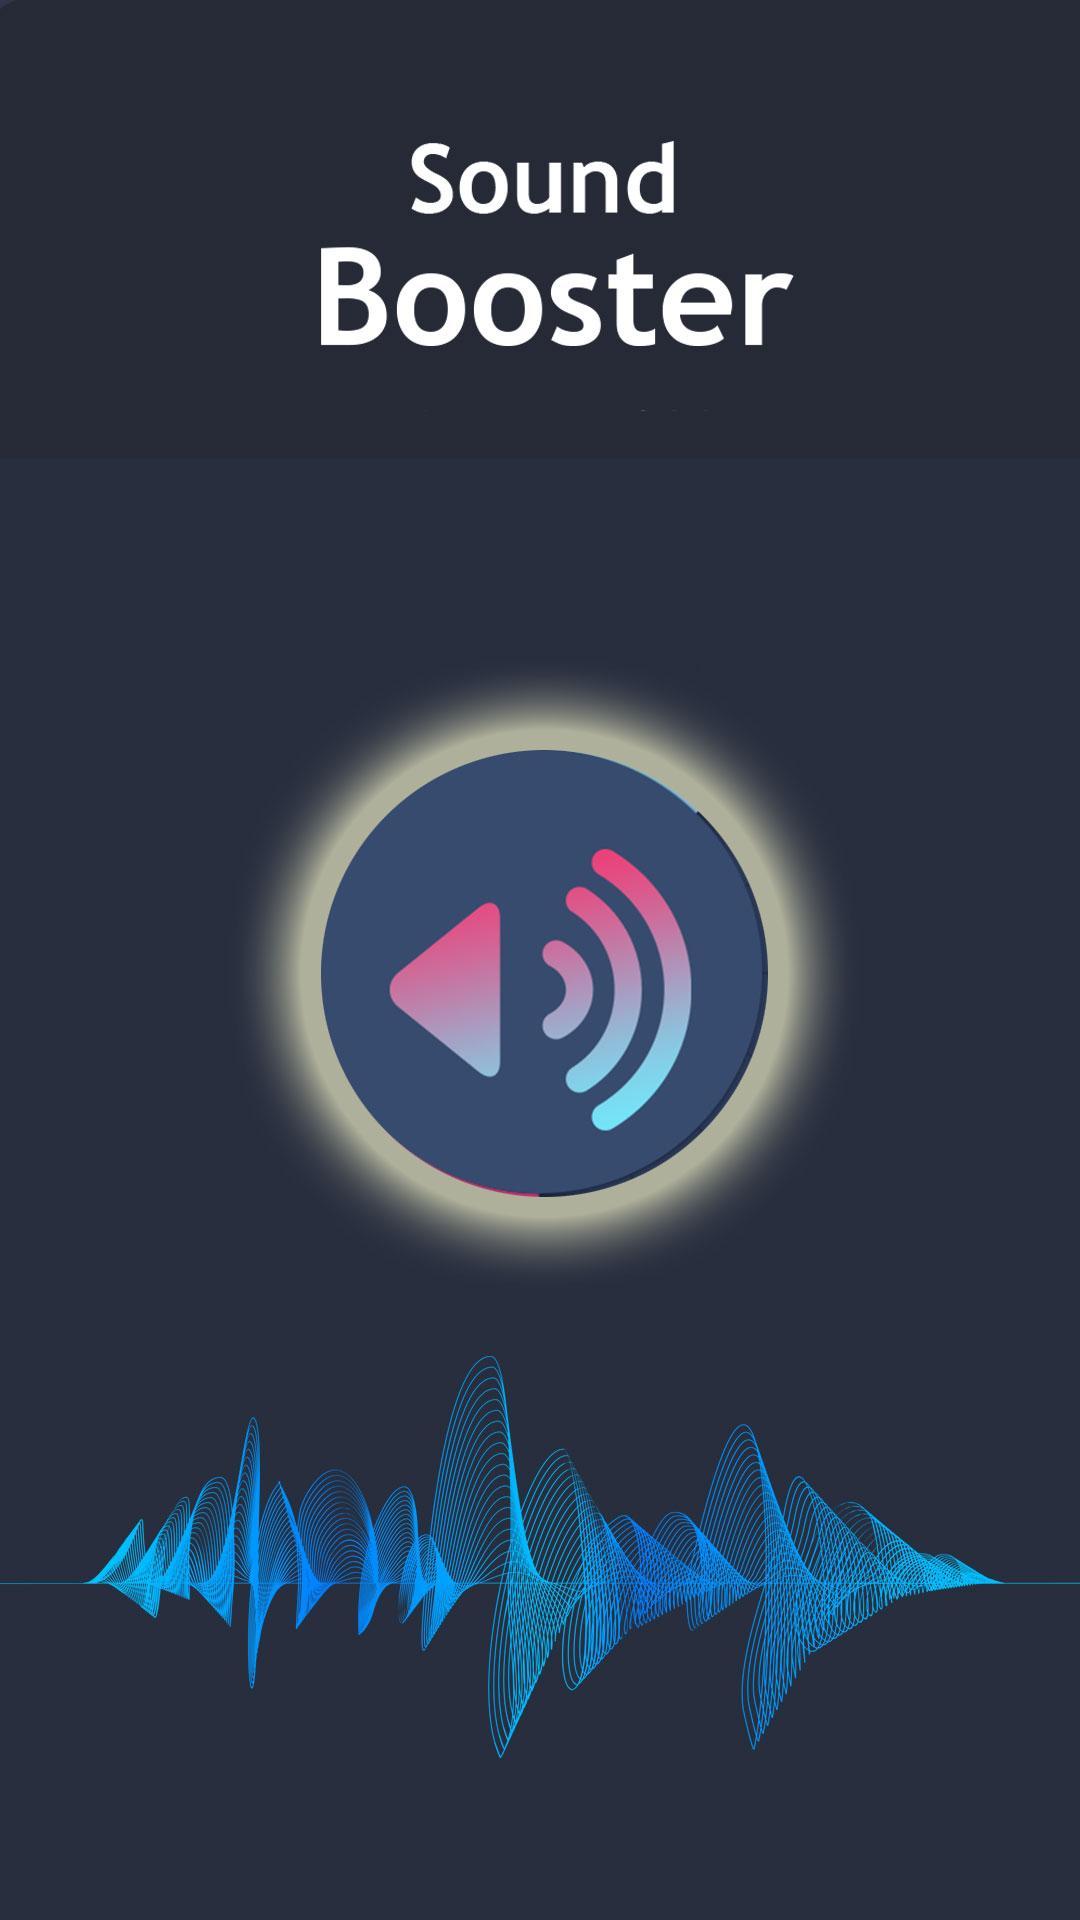 Sound Booster Increase Volume For Android Apk Download